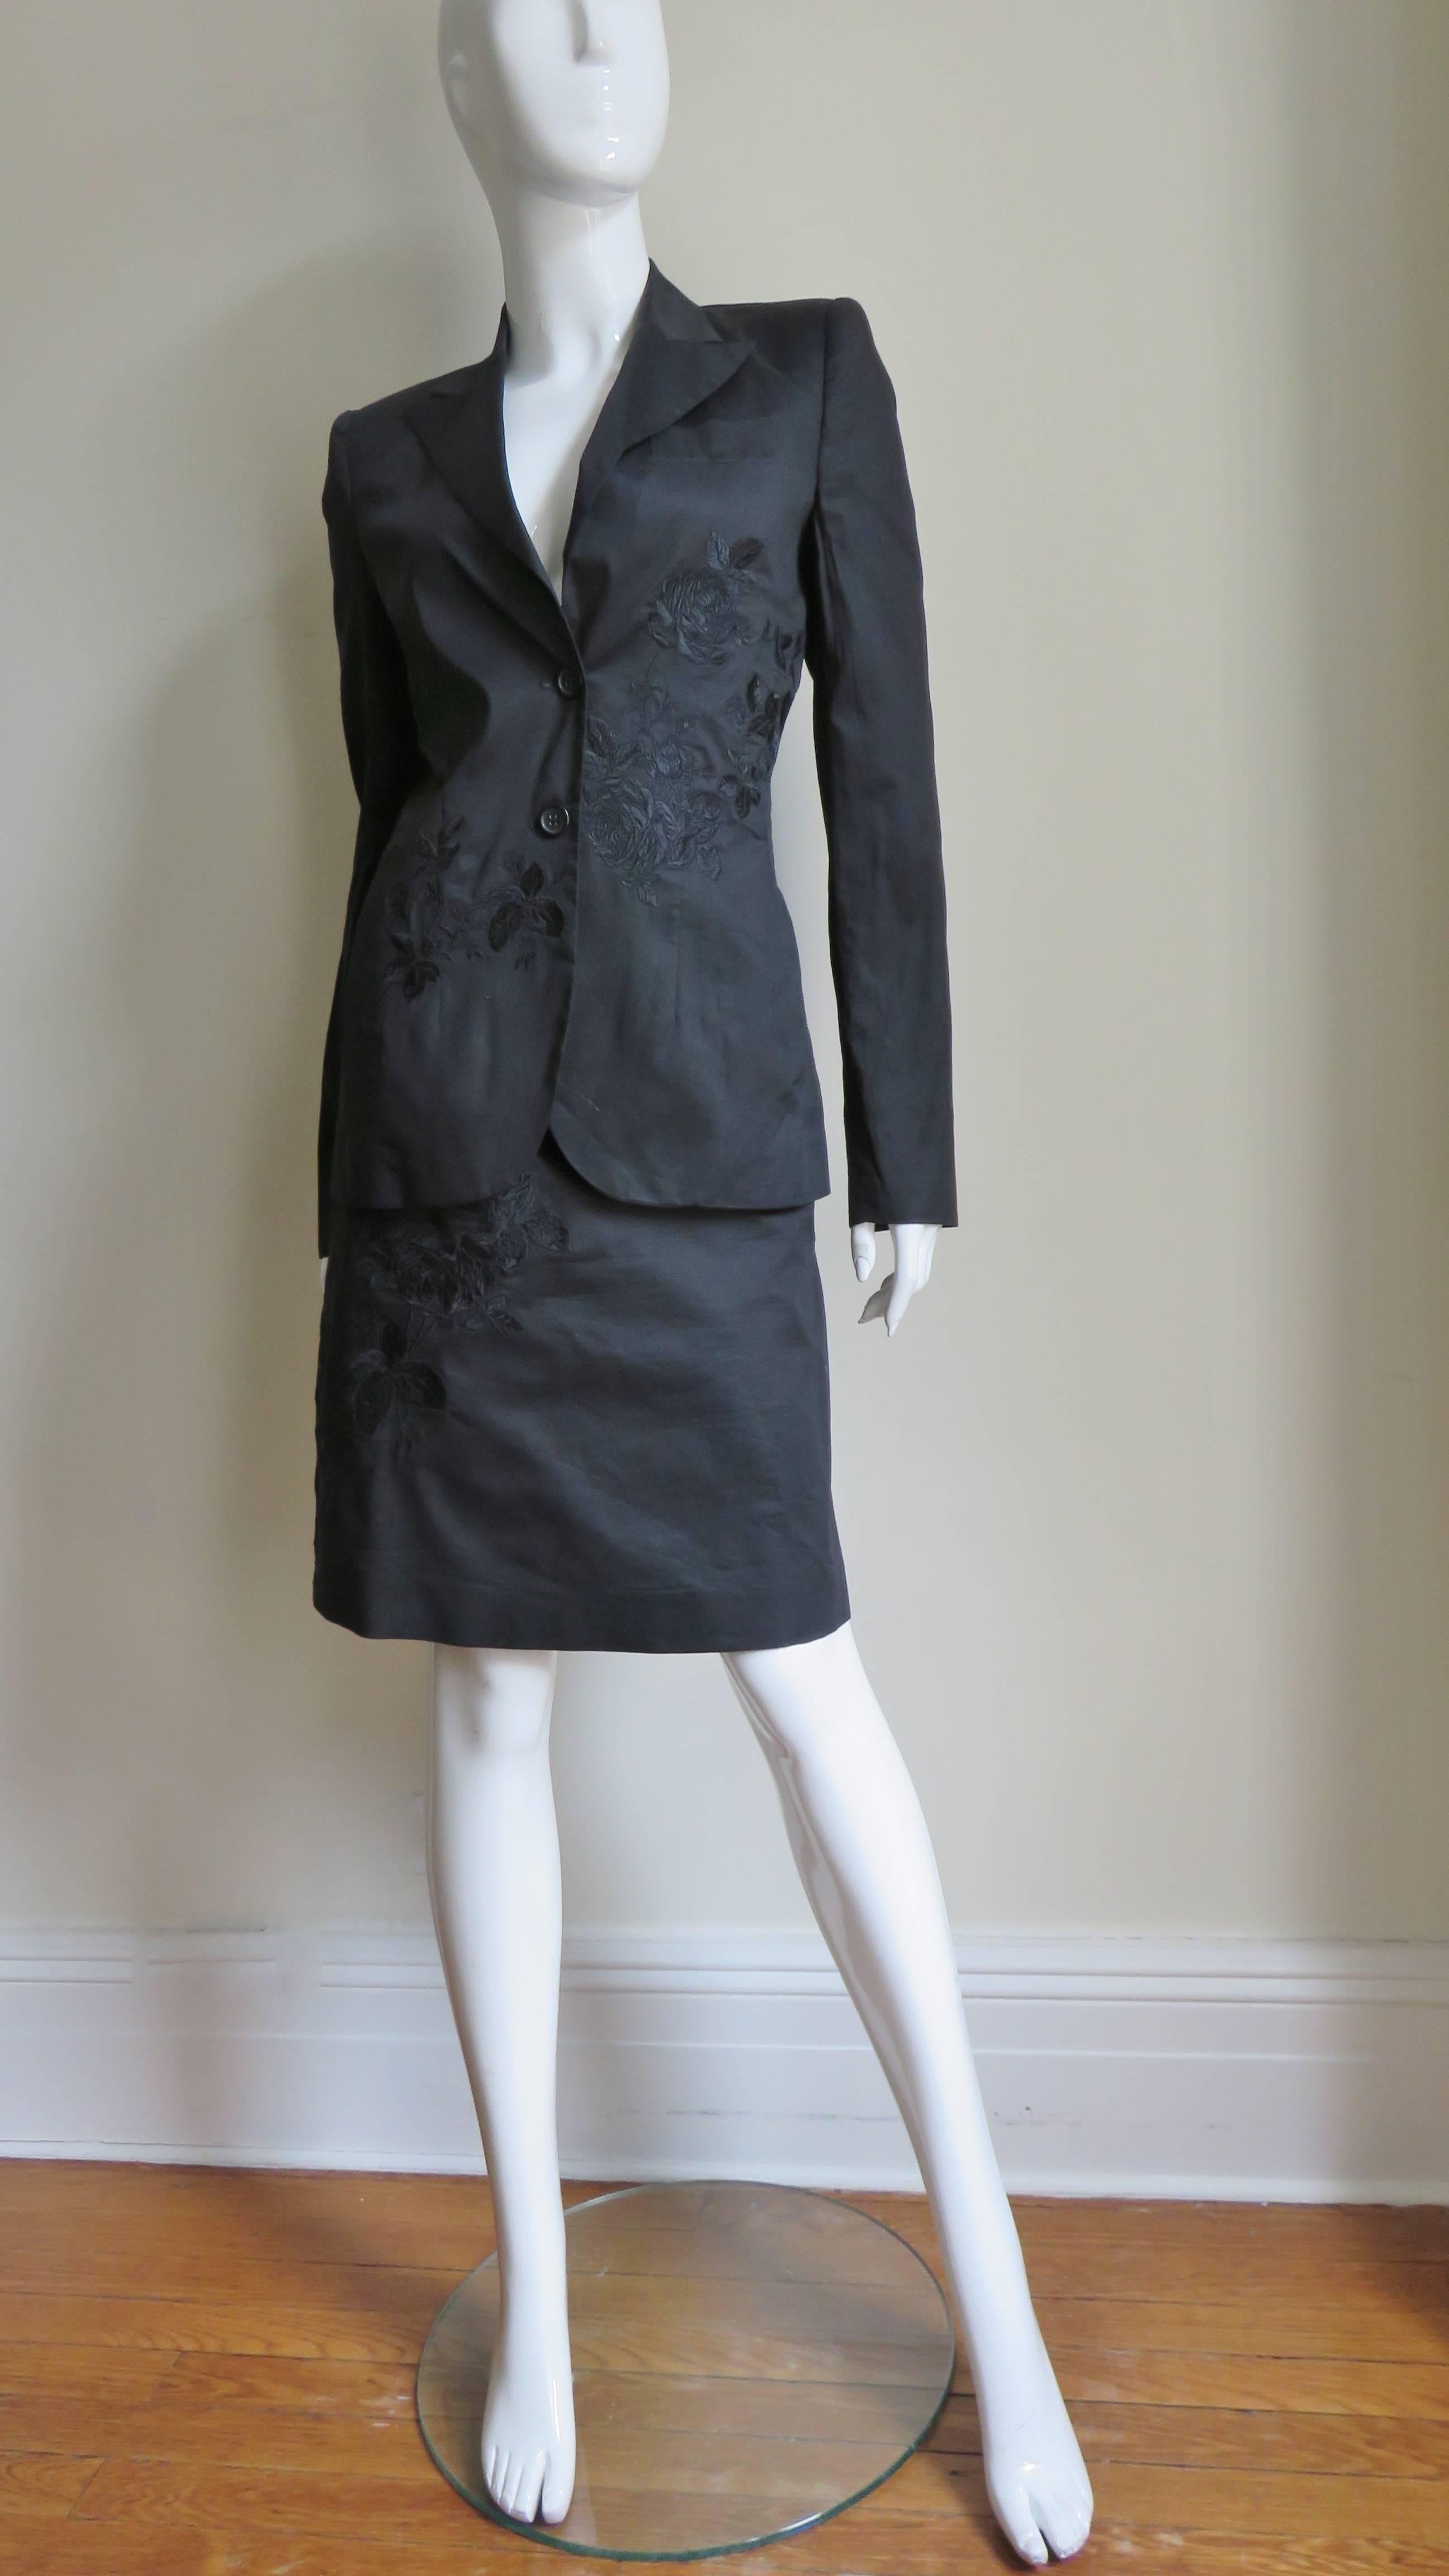 Alexander McQueen New S/S 2002 Three Piece Skirt Suit with Intricate Embroidery For Sale 2